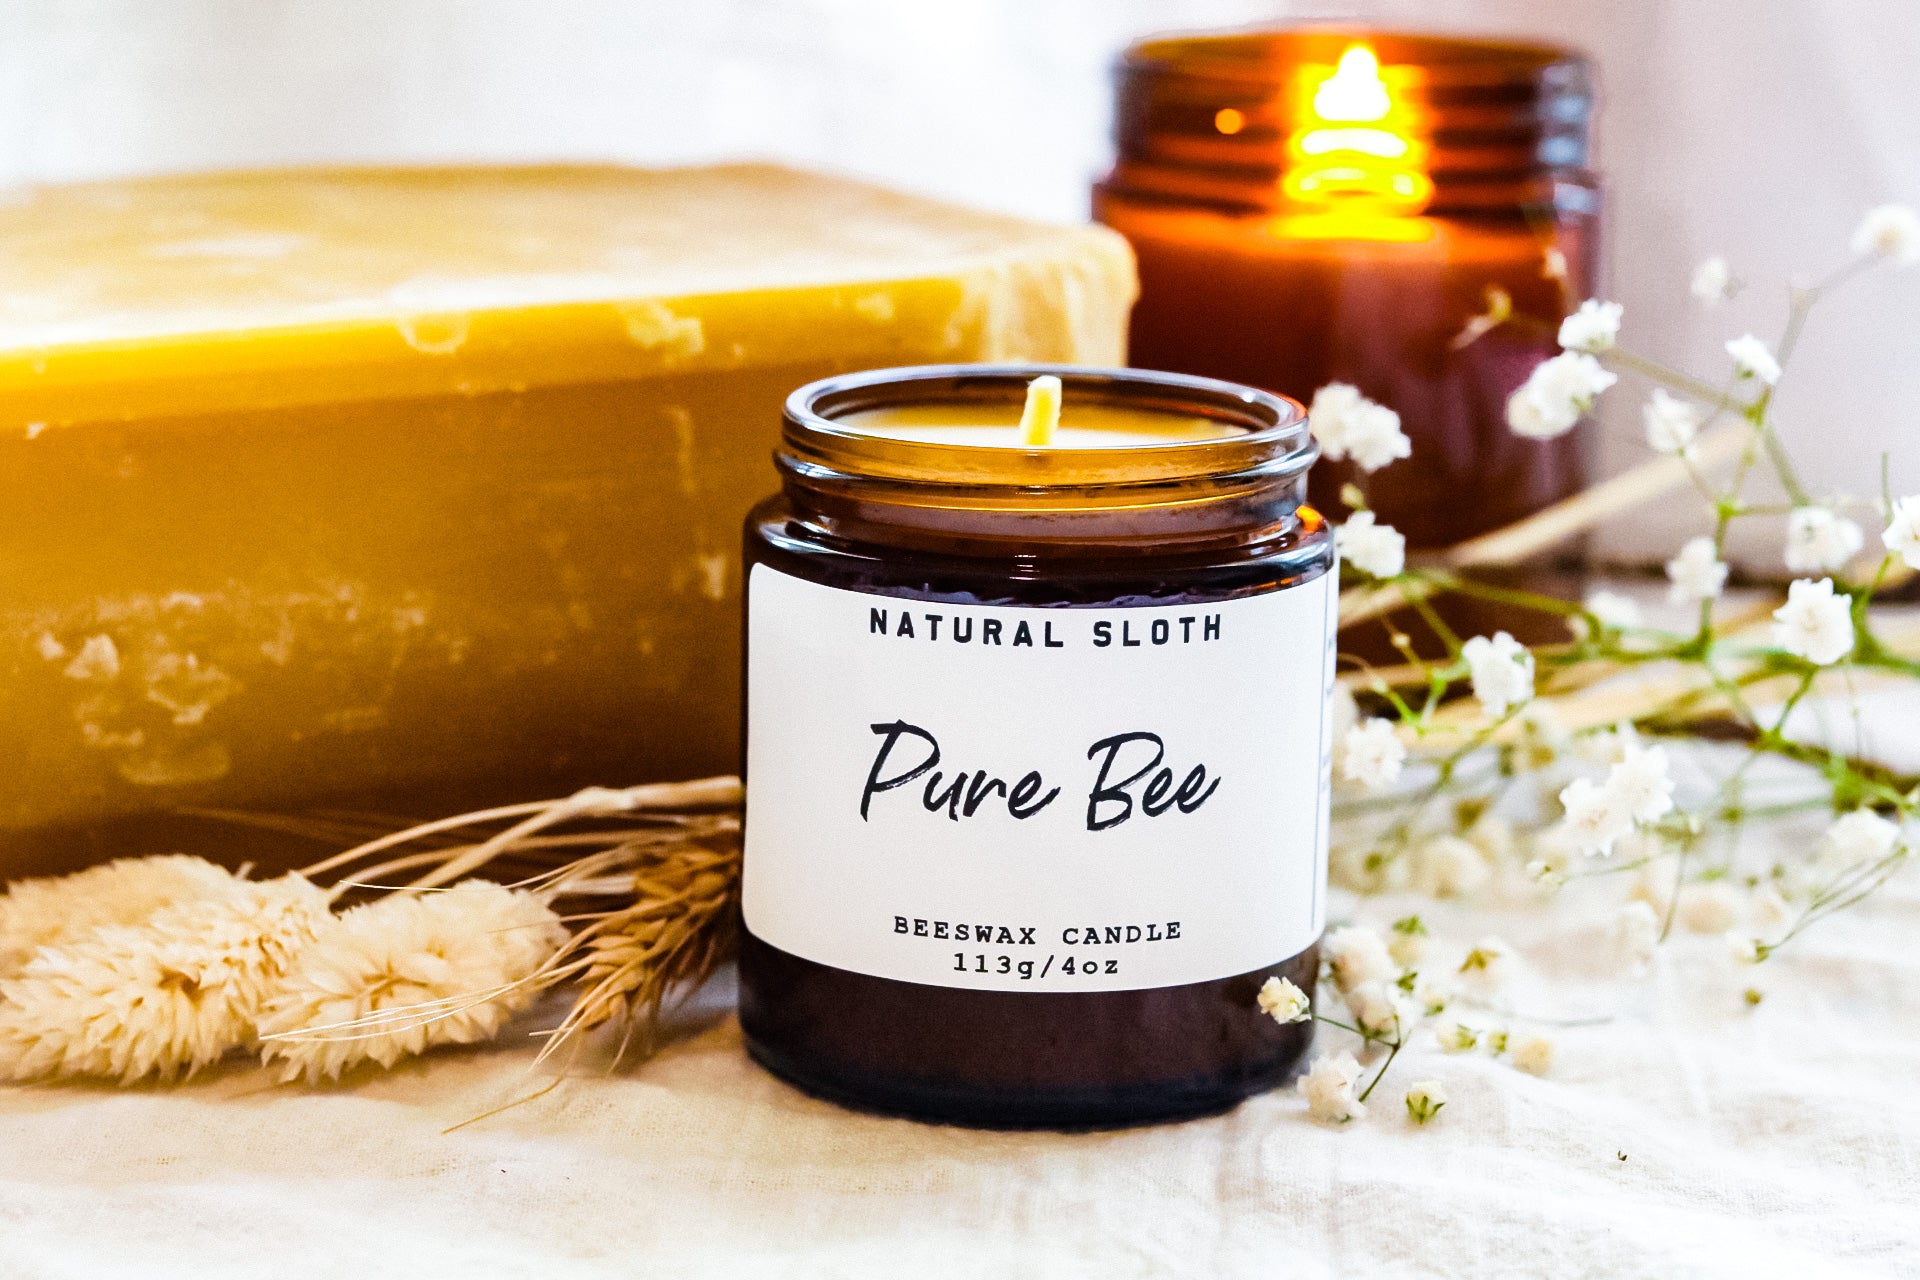 Beeswax Candles Made With Pure Essential Oils – Natural Sloth